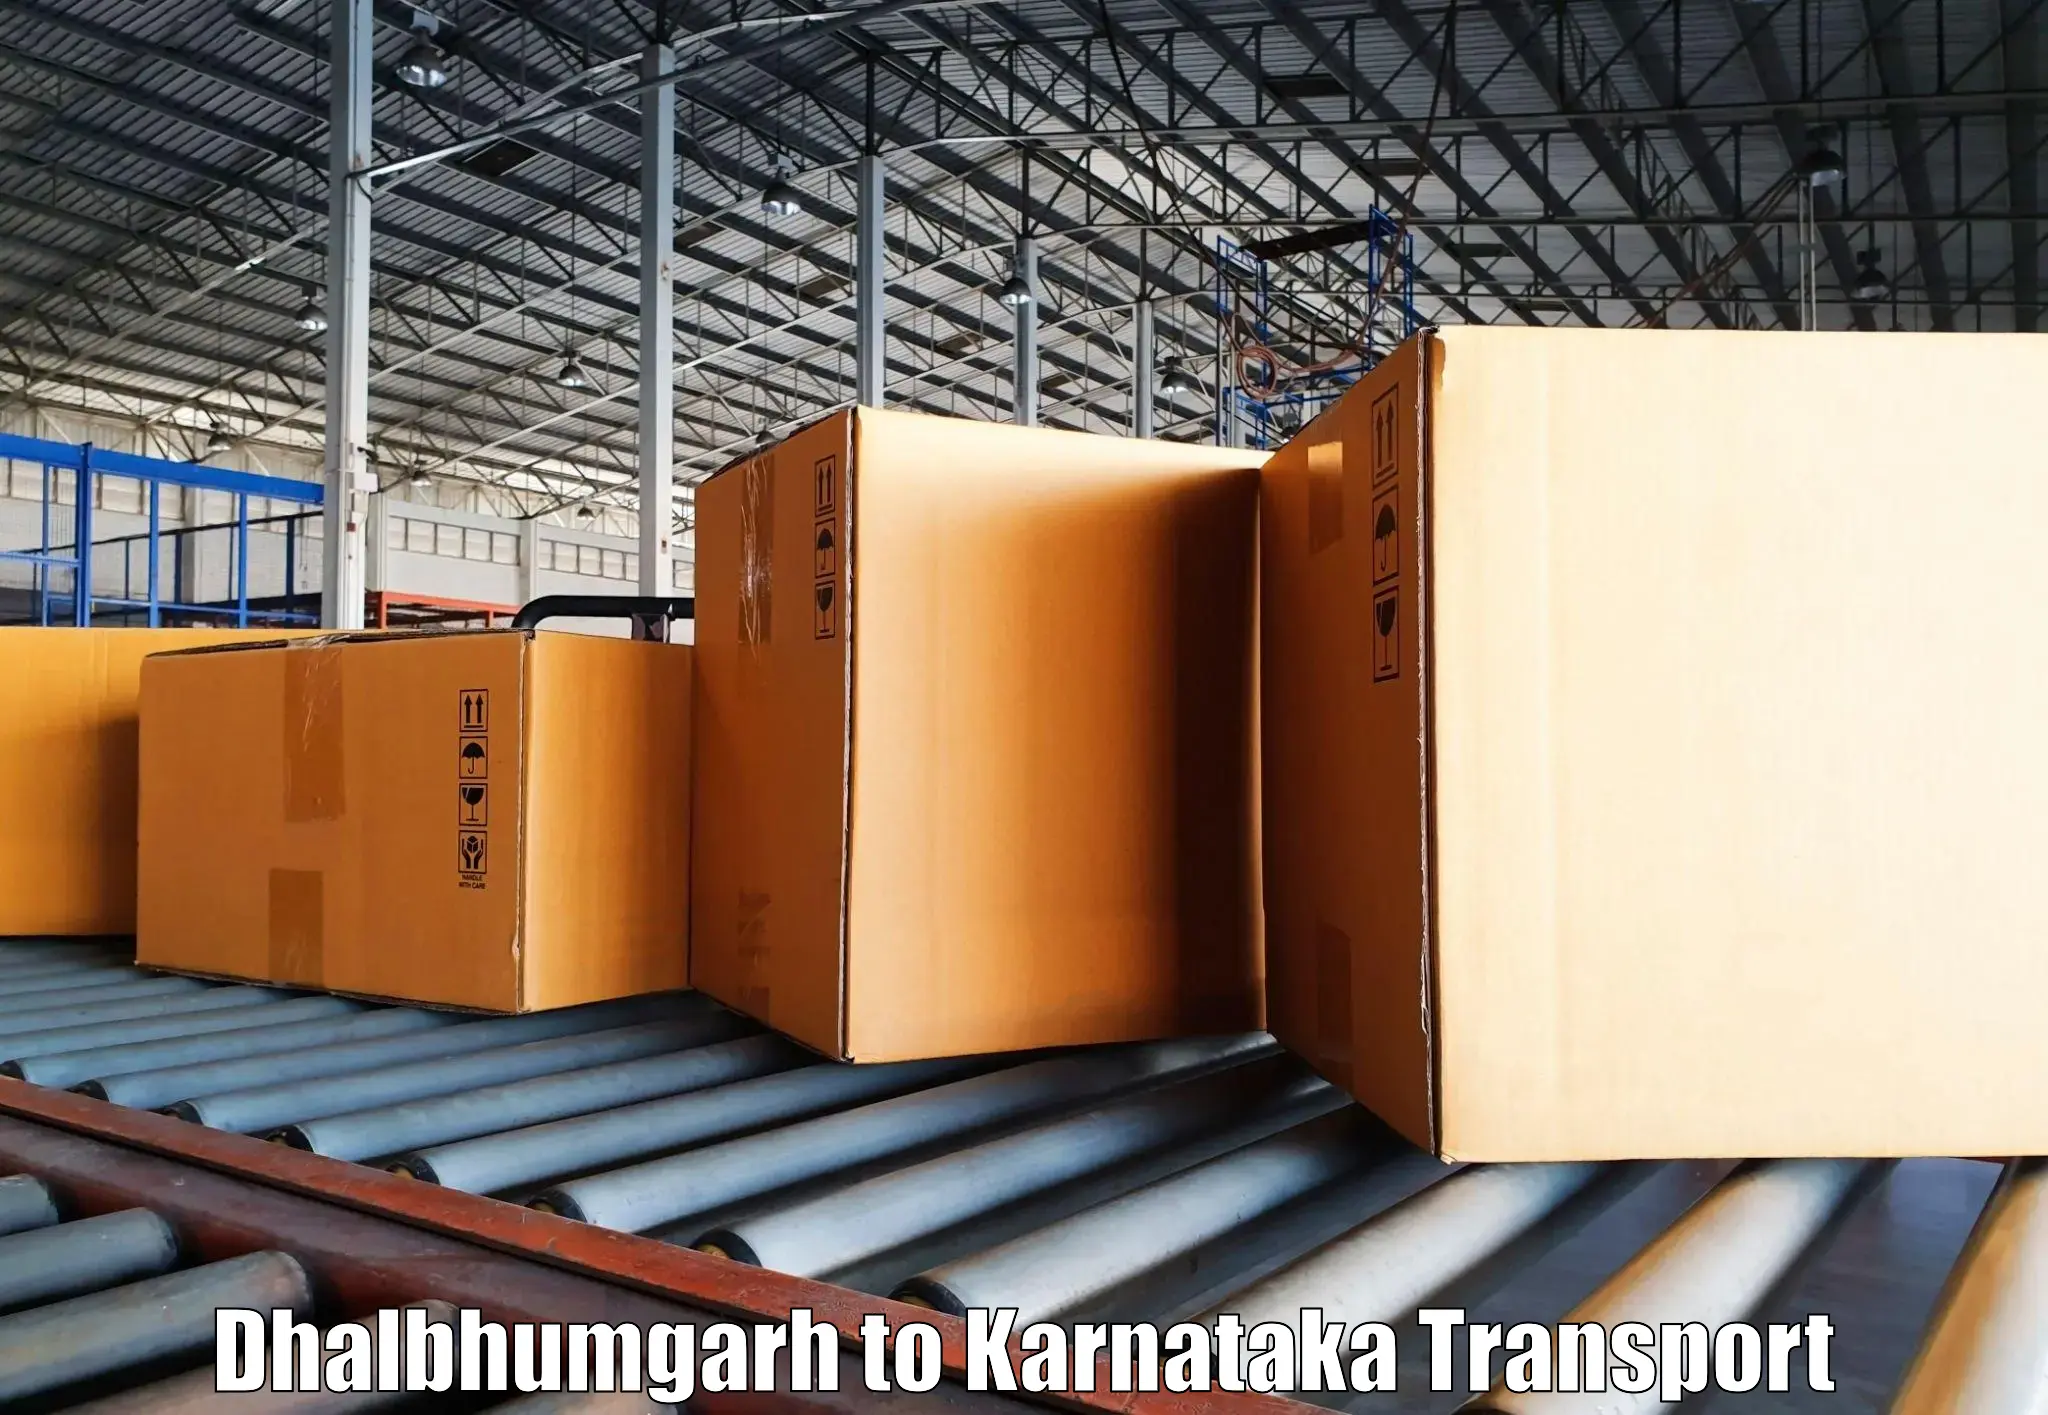 Air freight transport services in Dhalbhumgarh to Belagavi